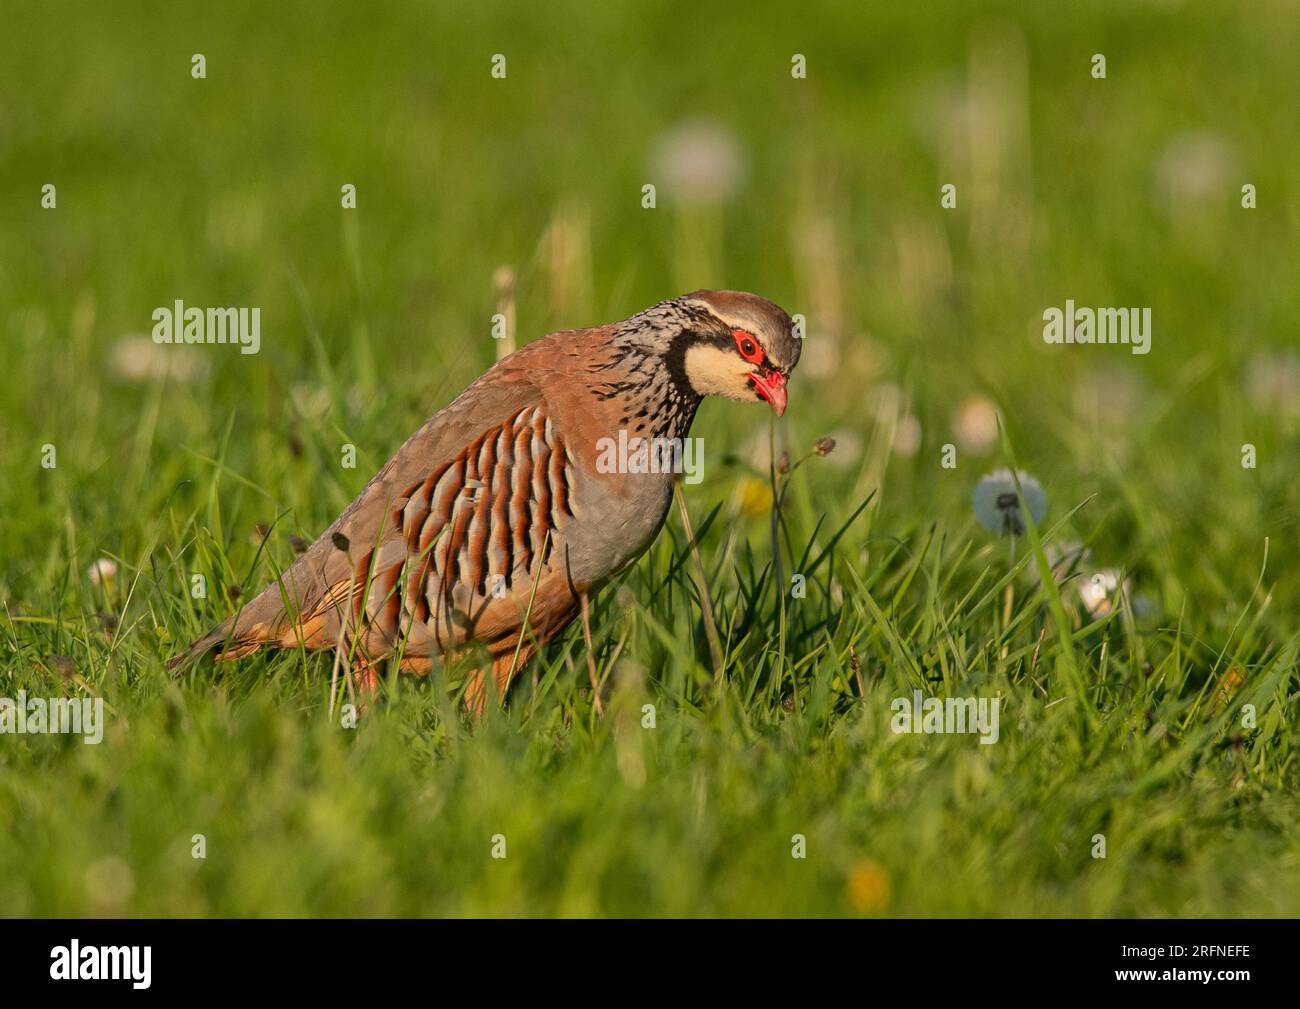 A close up of a French or red legged Partridge ( Alectoris rufa)in a grassy meadow with dandelion clocks. Suffolk, UK Stock Photo